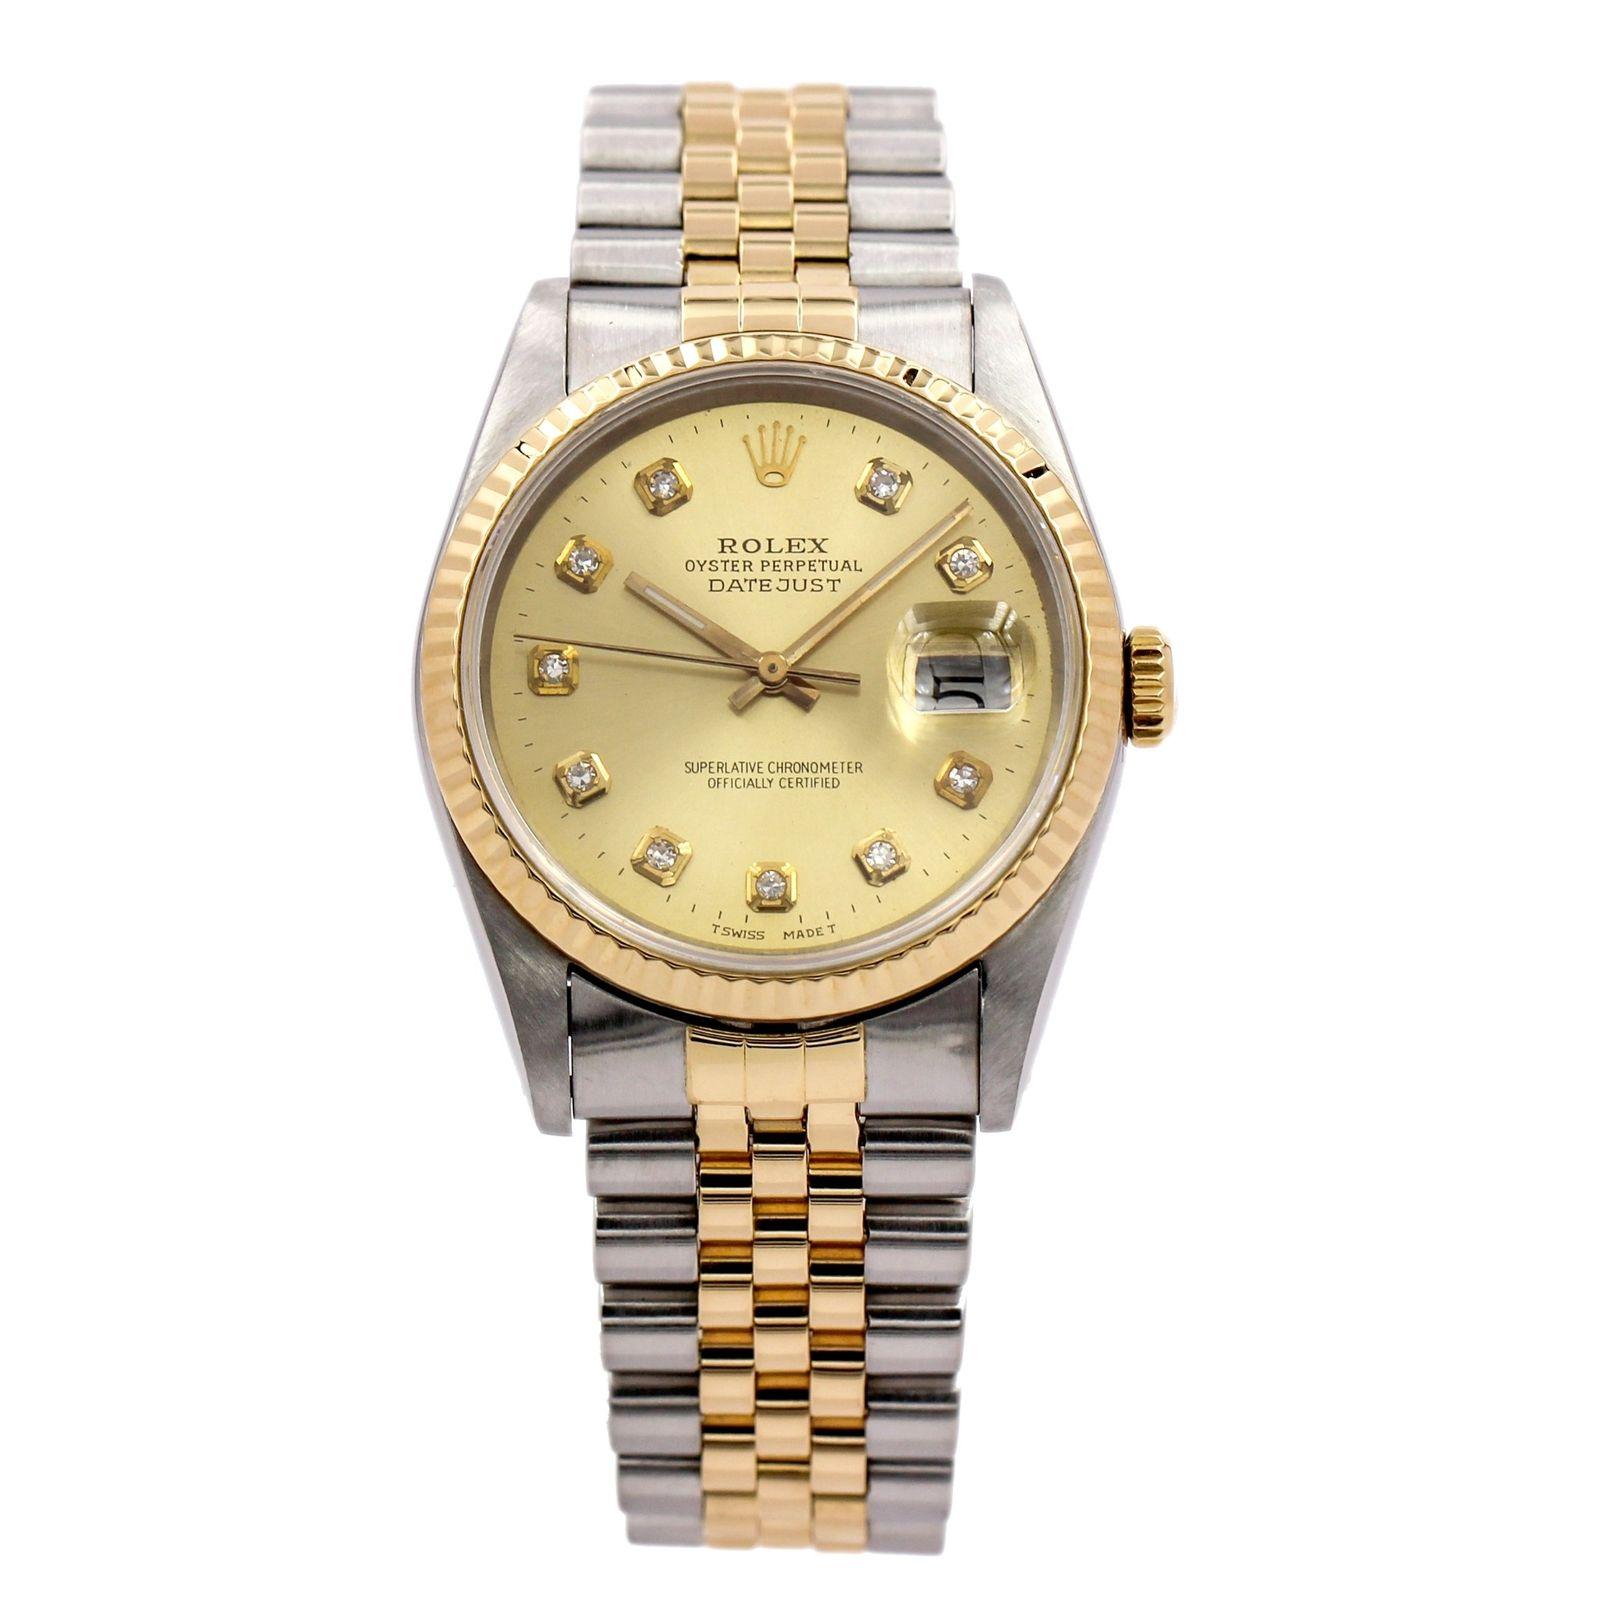 Rolex Datejust 16233 Stainless Steel and 18 Karat Yellow Gold Wristwatch For Sale